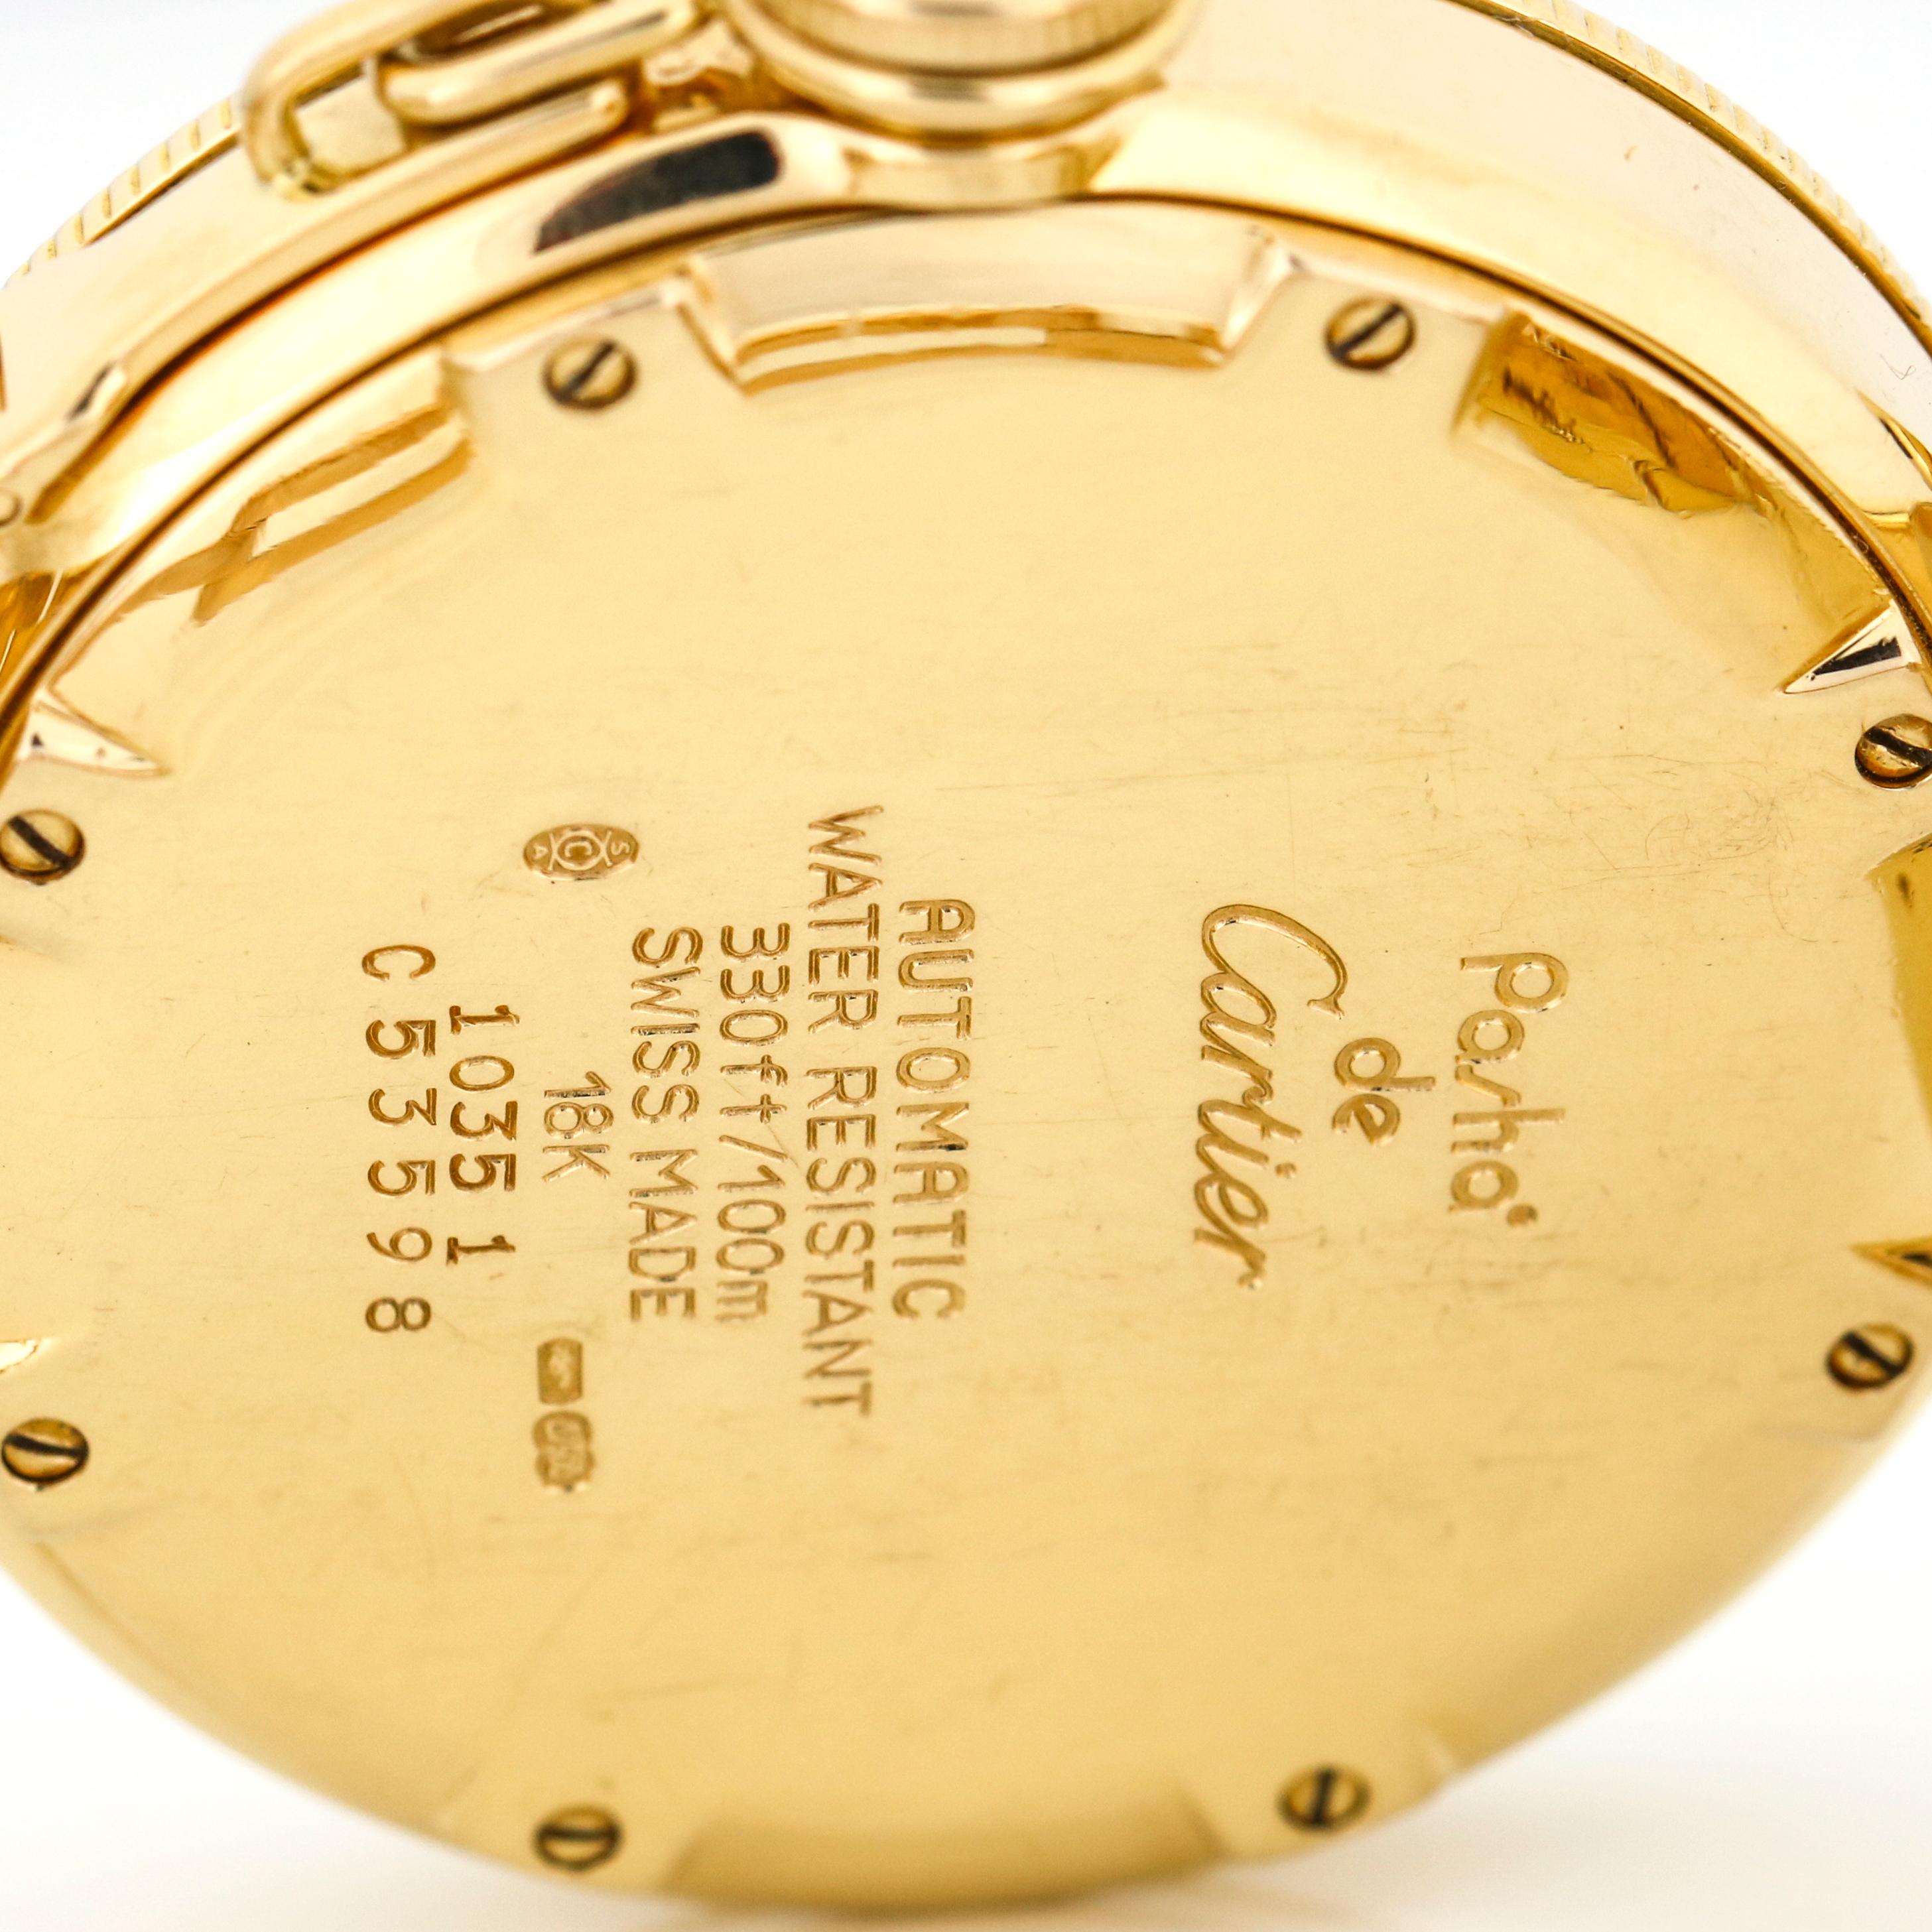 Cartier Pasha 18 Karat Yellow Gold Automatic Watch For Sale 4